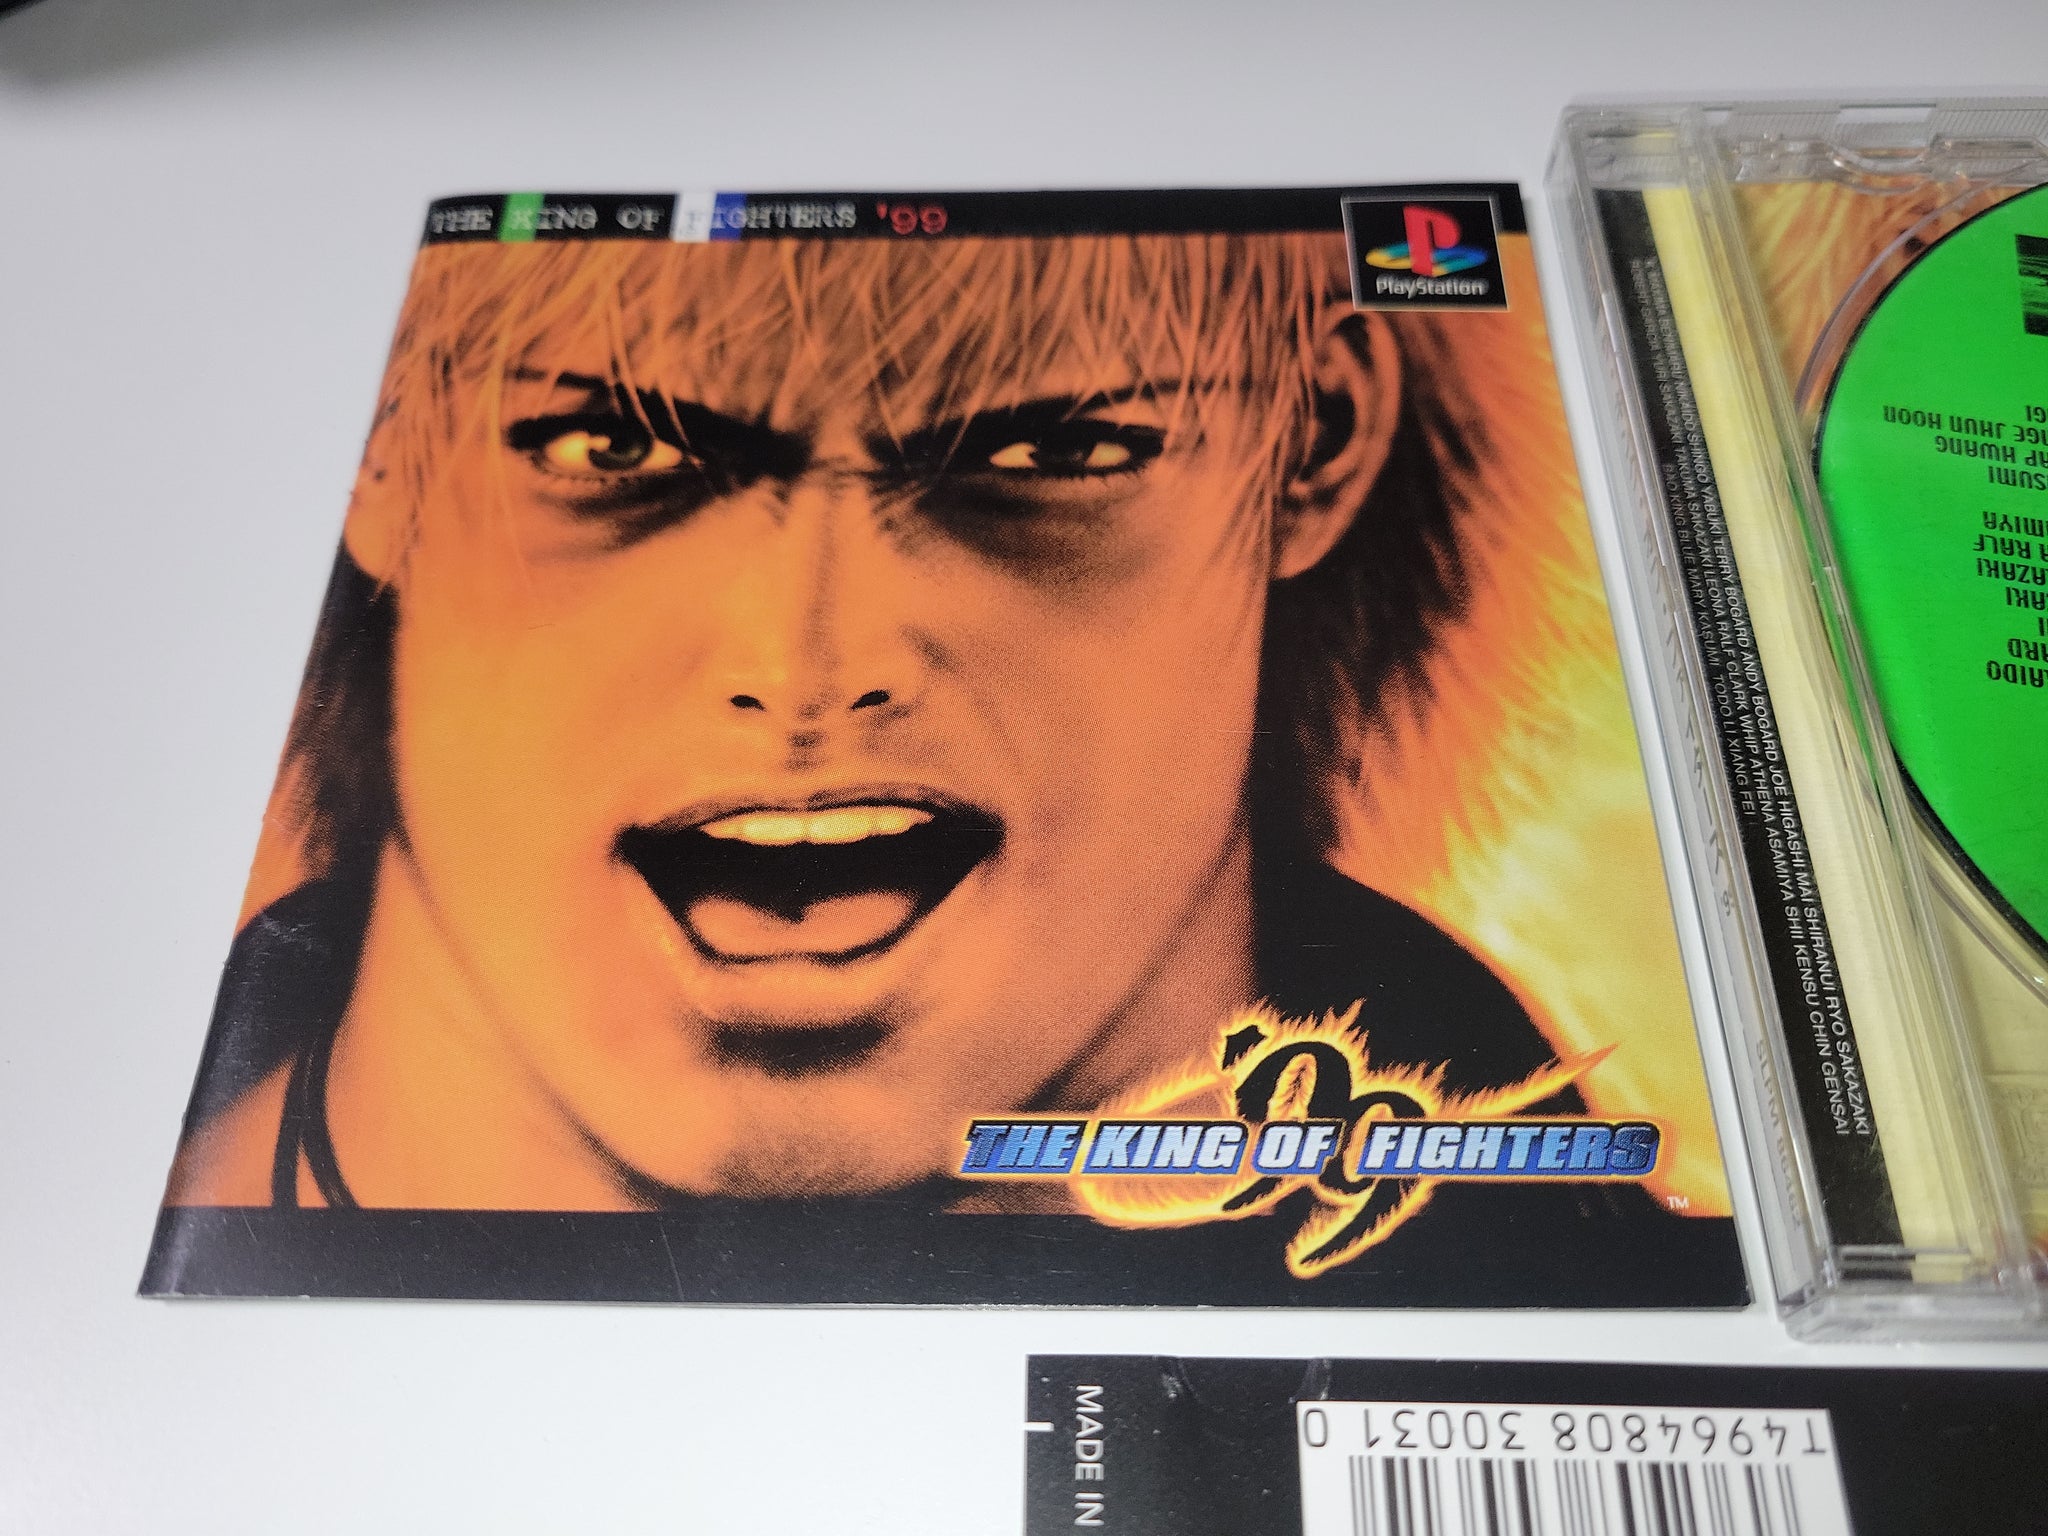 PlayStation -- THE KING OF FIGHTERS 99 -- PS1. JAPAN GAME. 28138